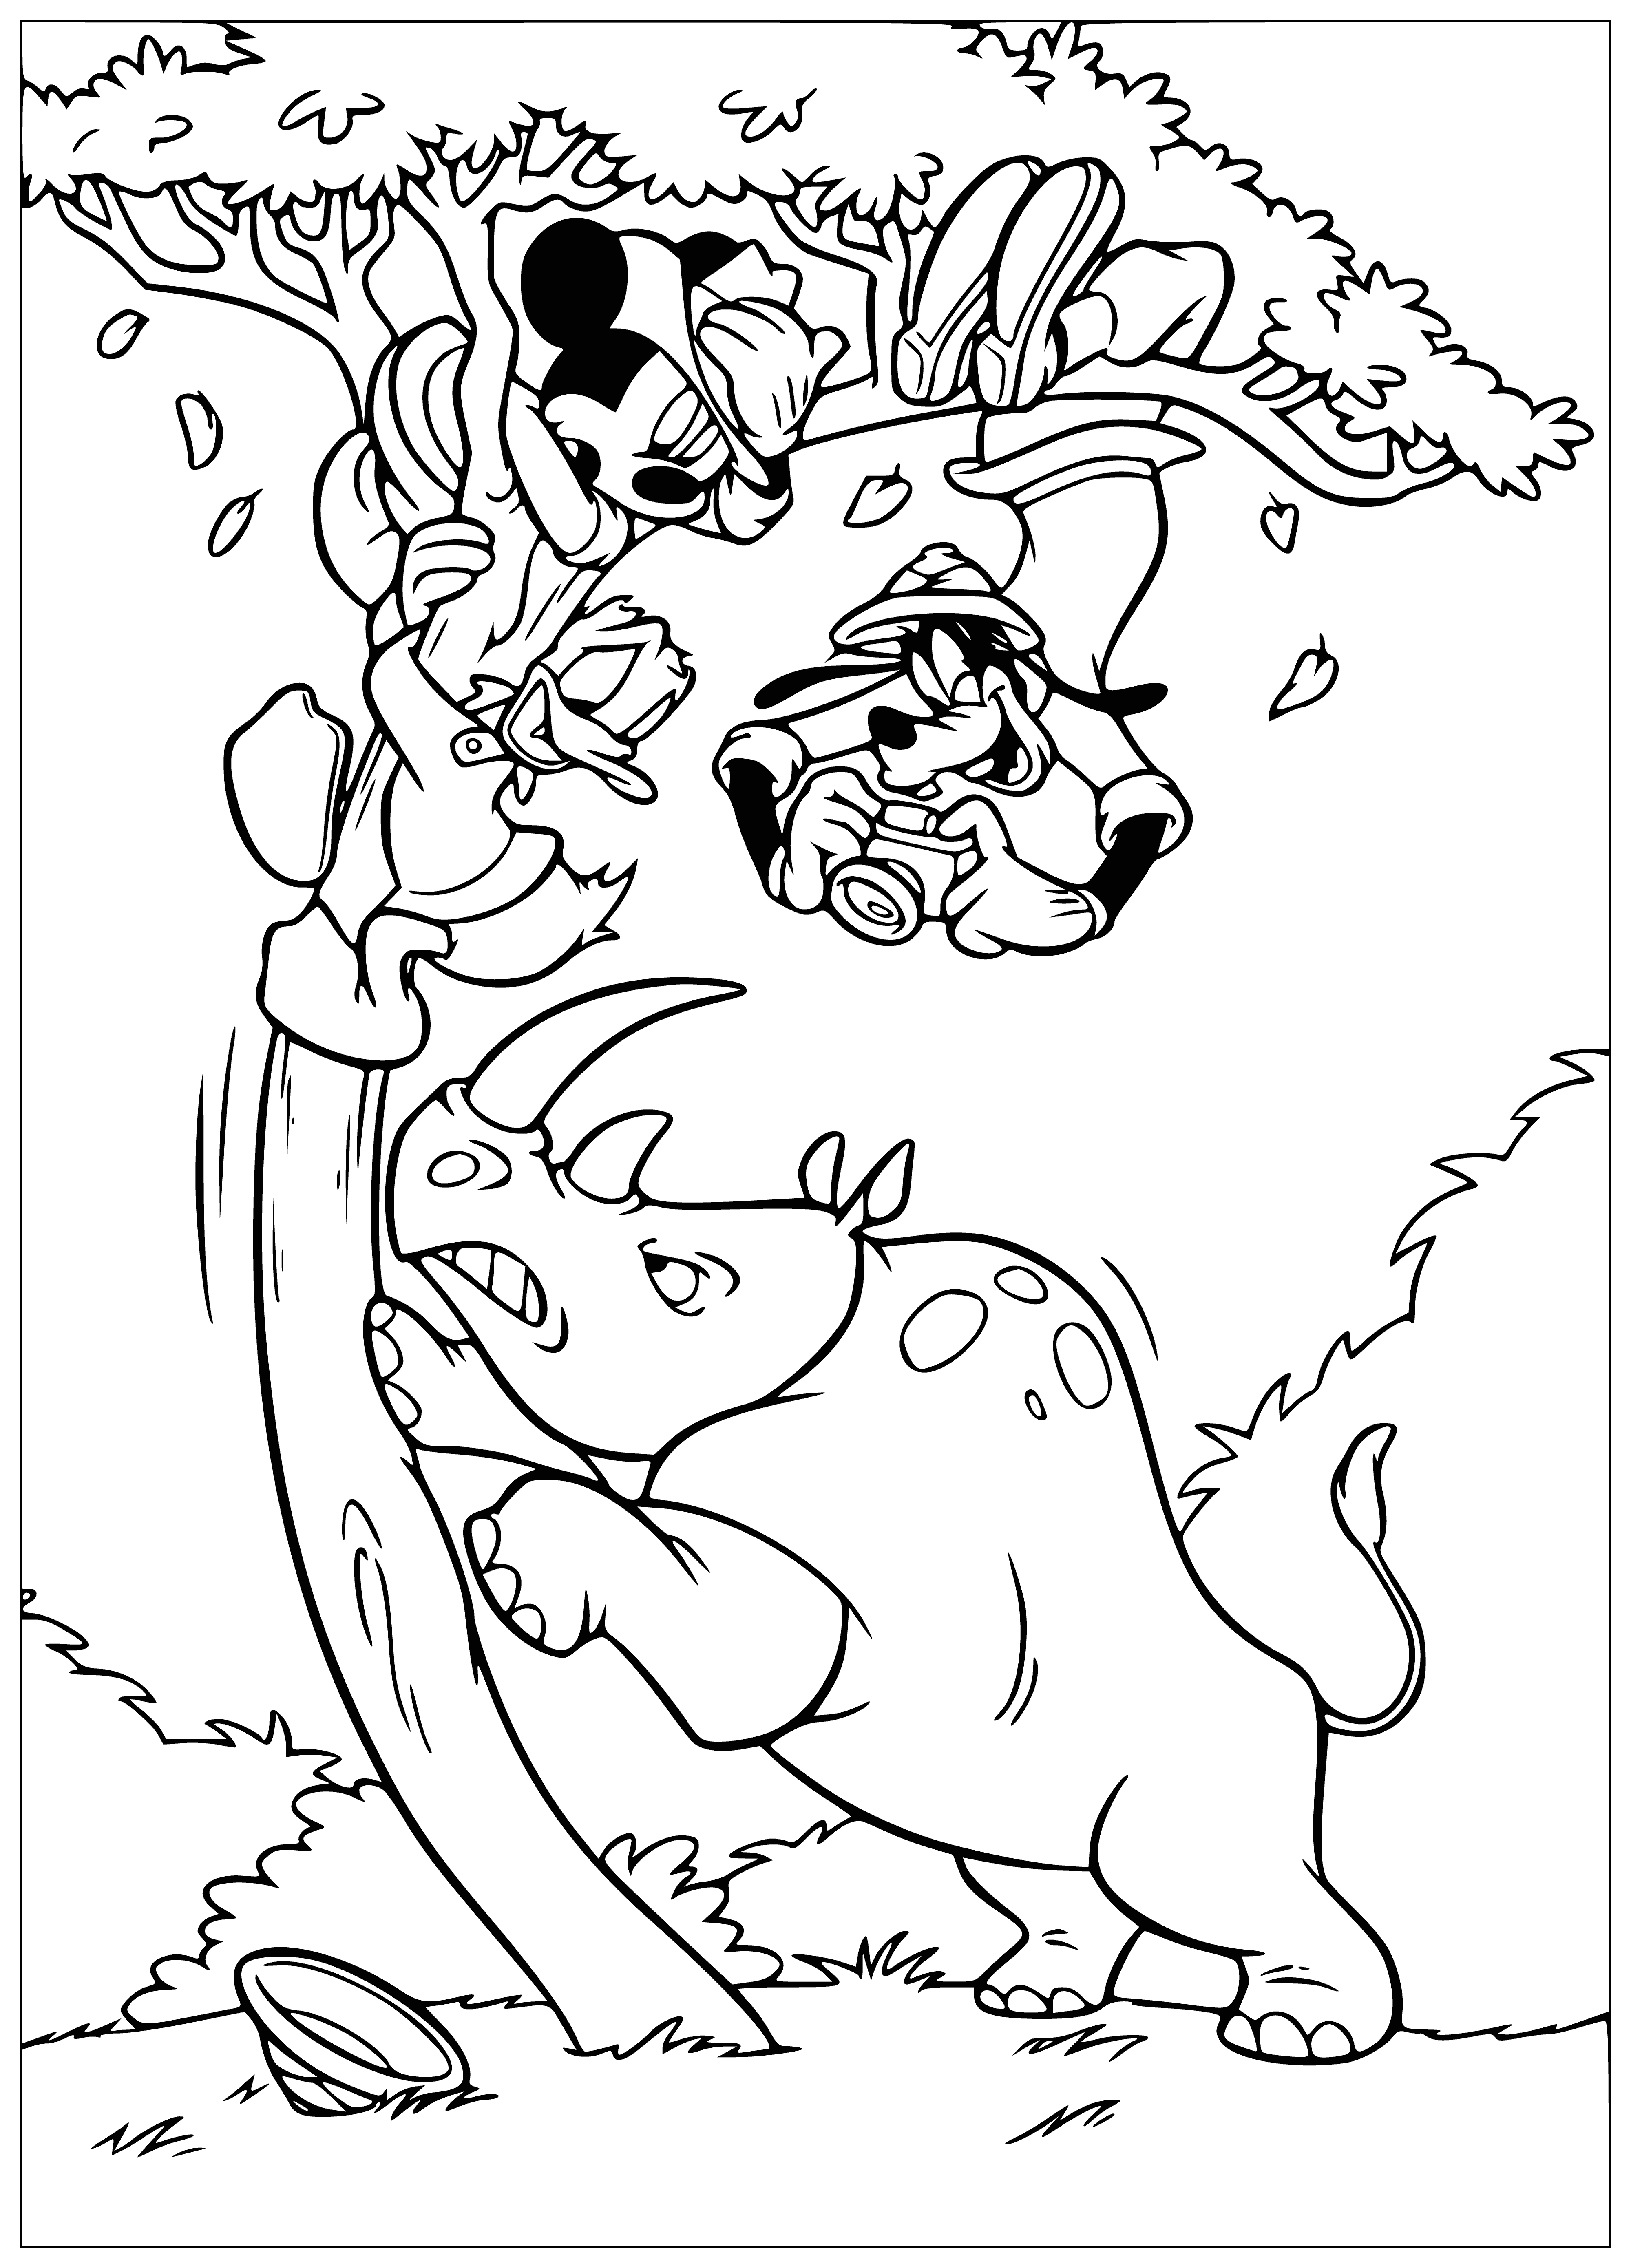 coloring page: Large blue and white rhino walks through green grass w/ long horn and small tail. Wears a red and white shirt w/ Mickey Mouse.